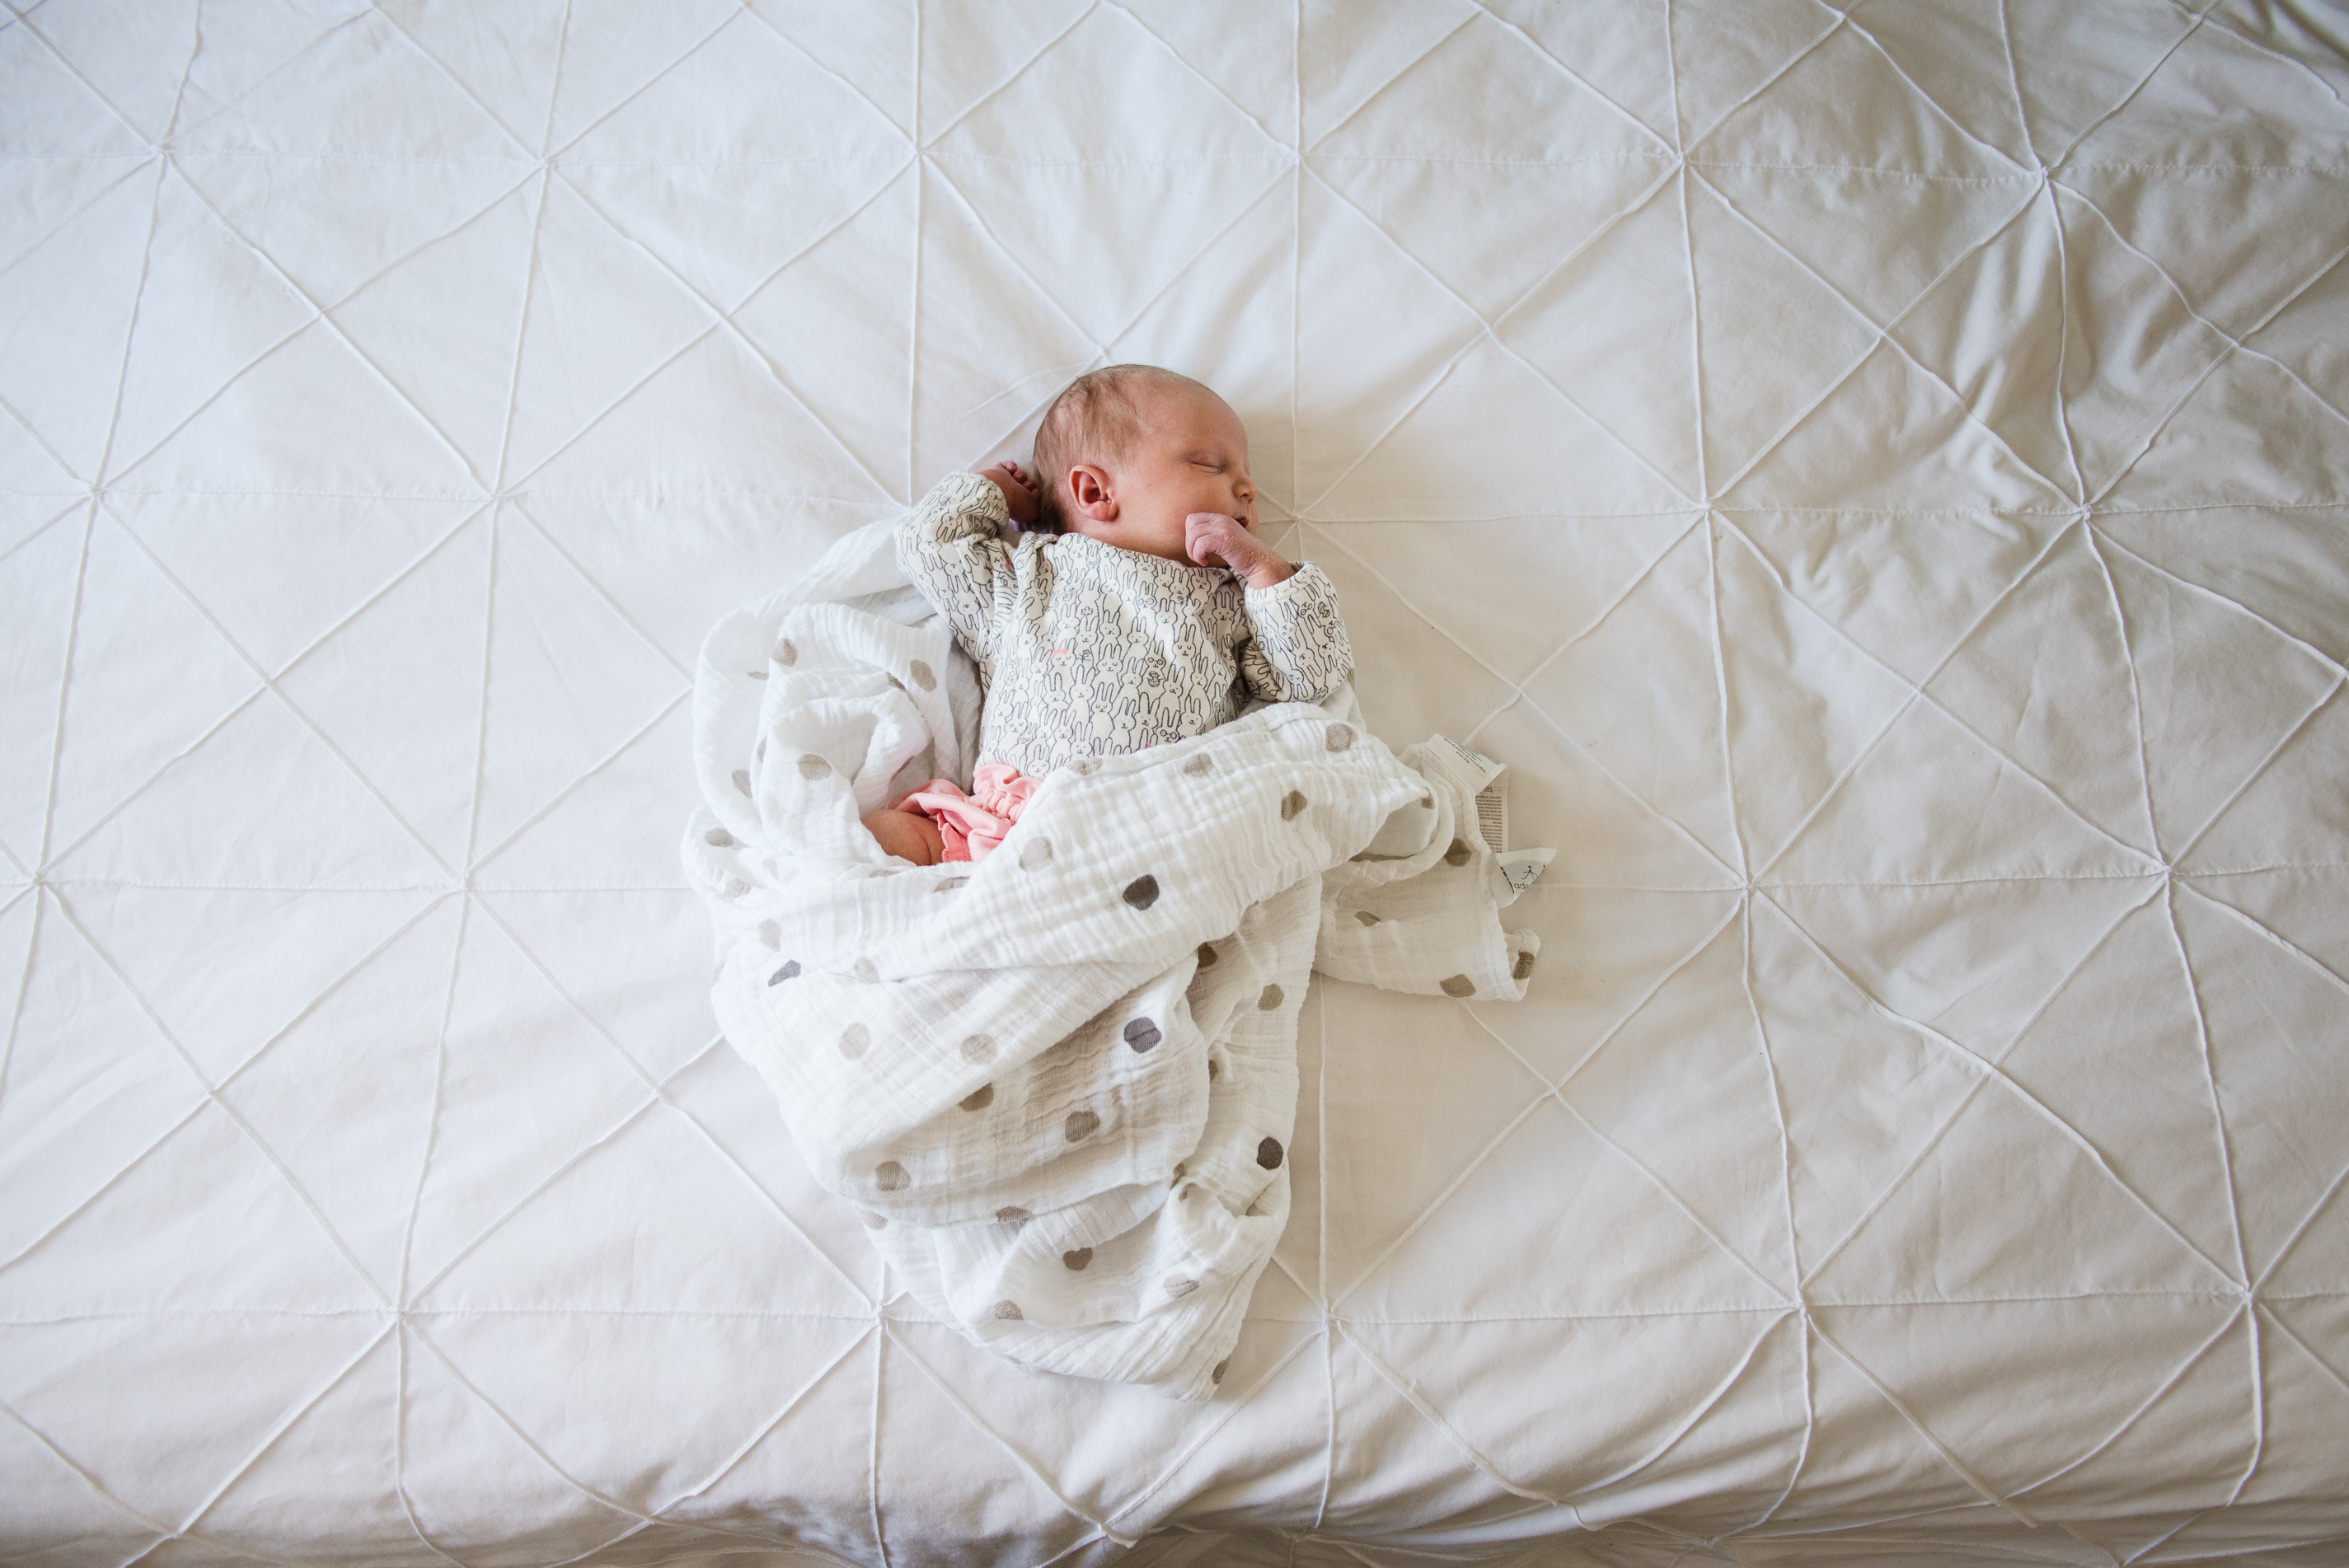 A newborn baby sleeping soundly on a bed.